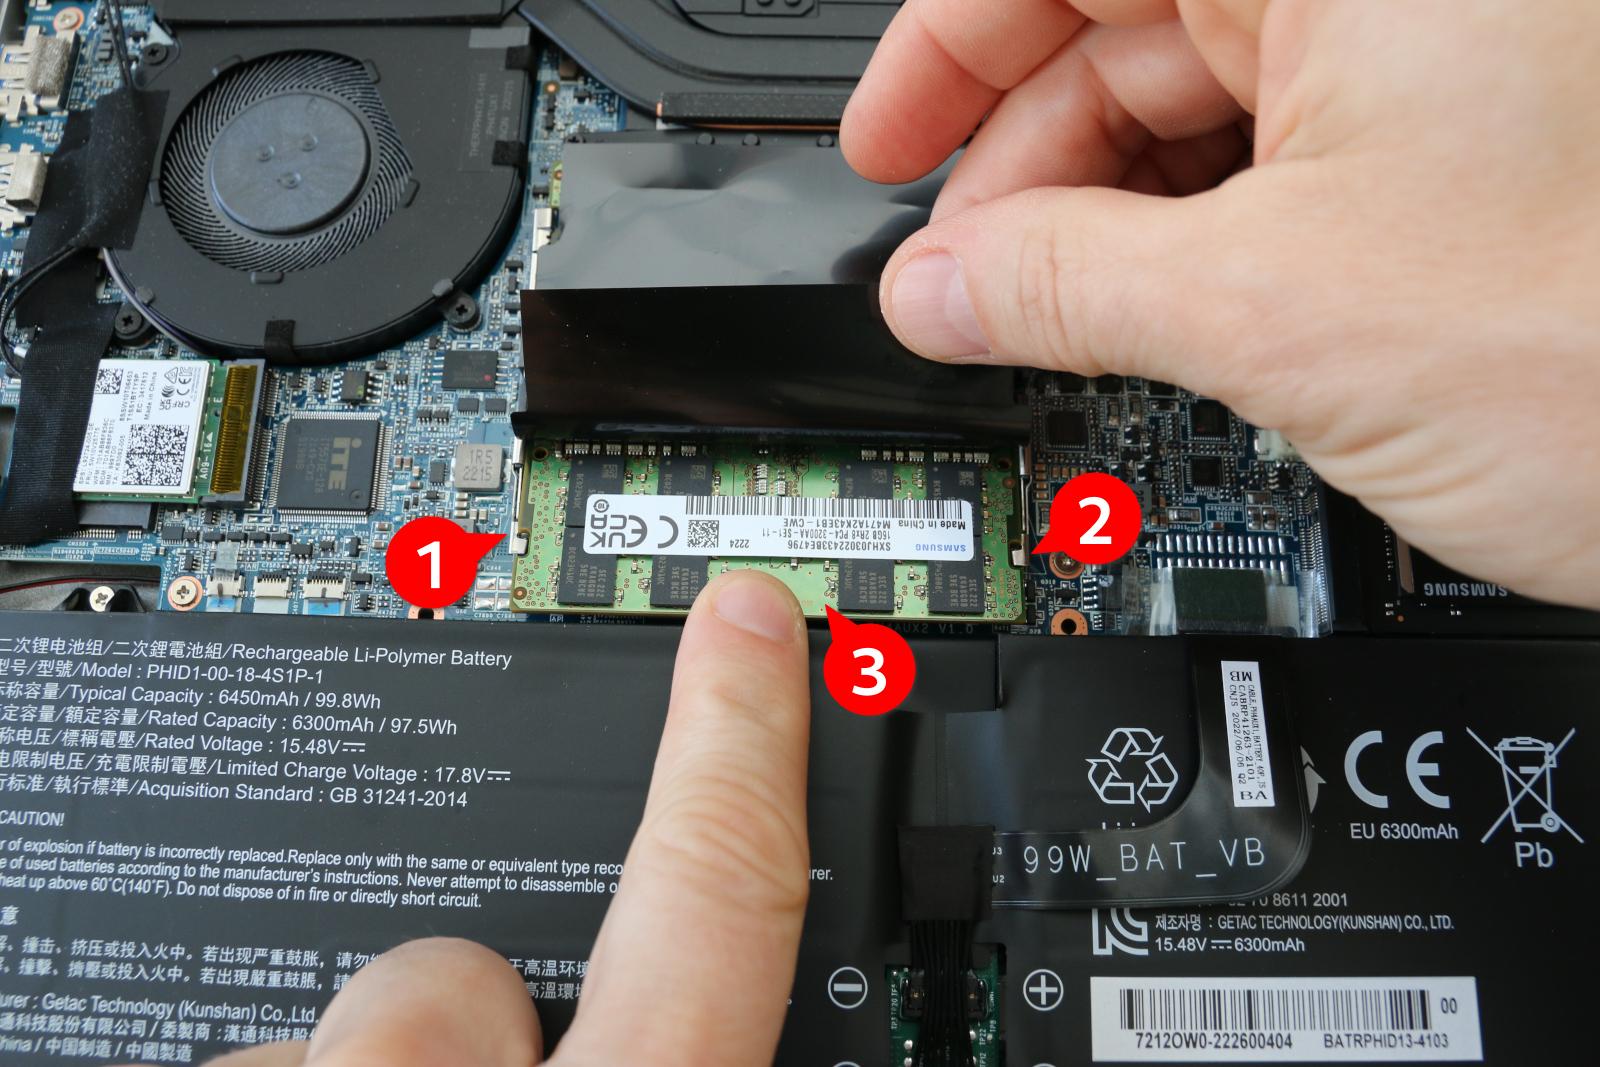 To remove the RAM module, pull apart the two small clips on the right and left of the memory chip. The ram circuit board then springs slightly towards you due to spring force.